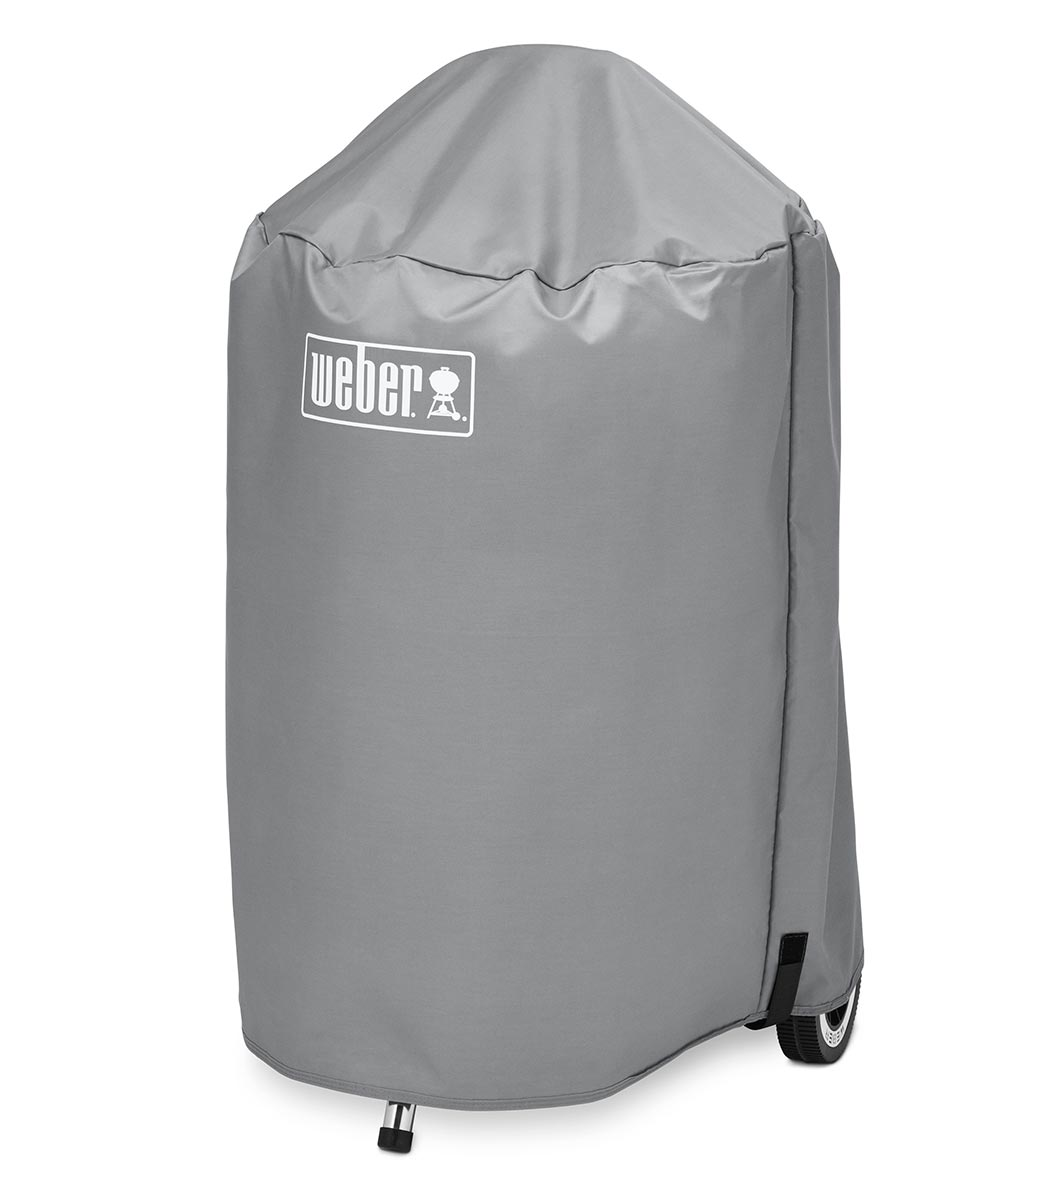 weber-barbecue-cover_7175.jpg